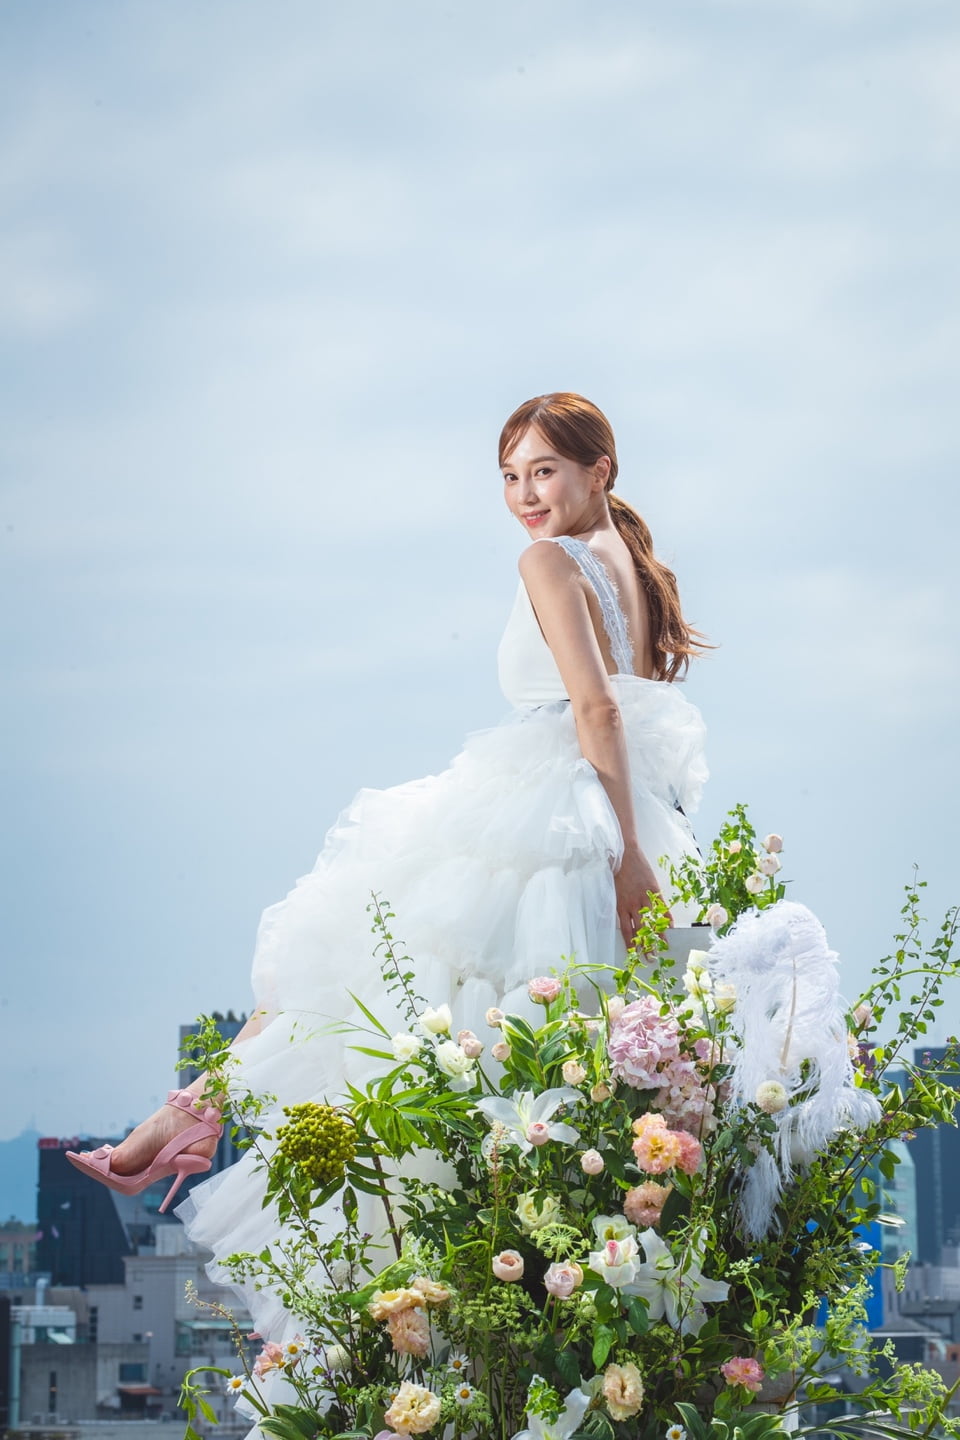 Ayumi becomes a mother after two years of marriage